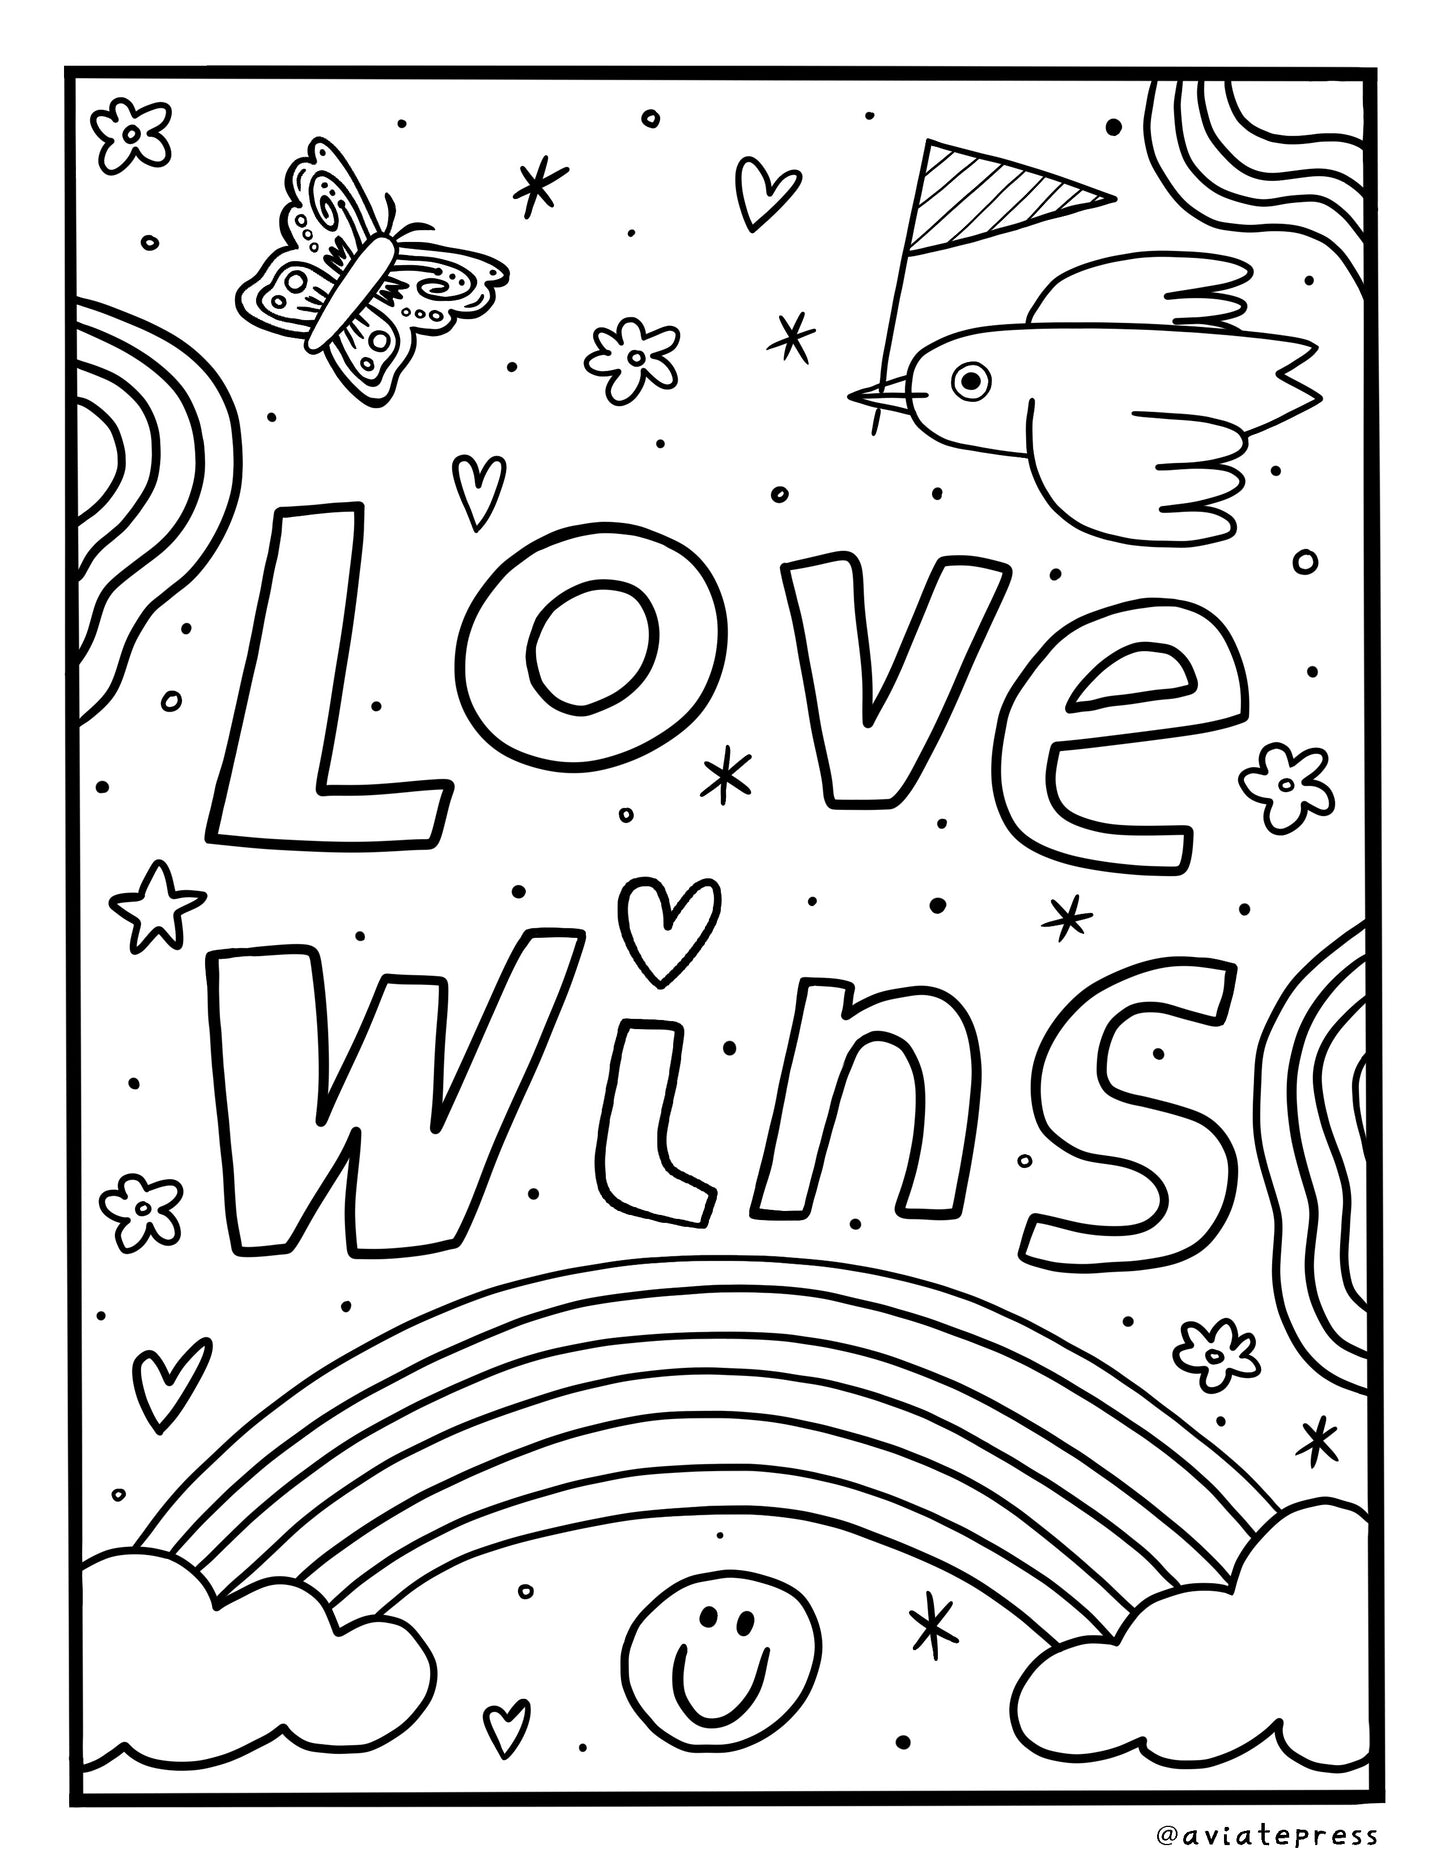 Love Wins Coloring Page Download – Aviate Press